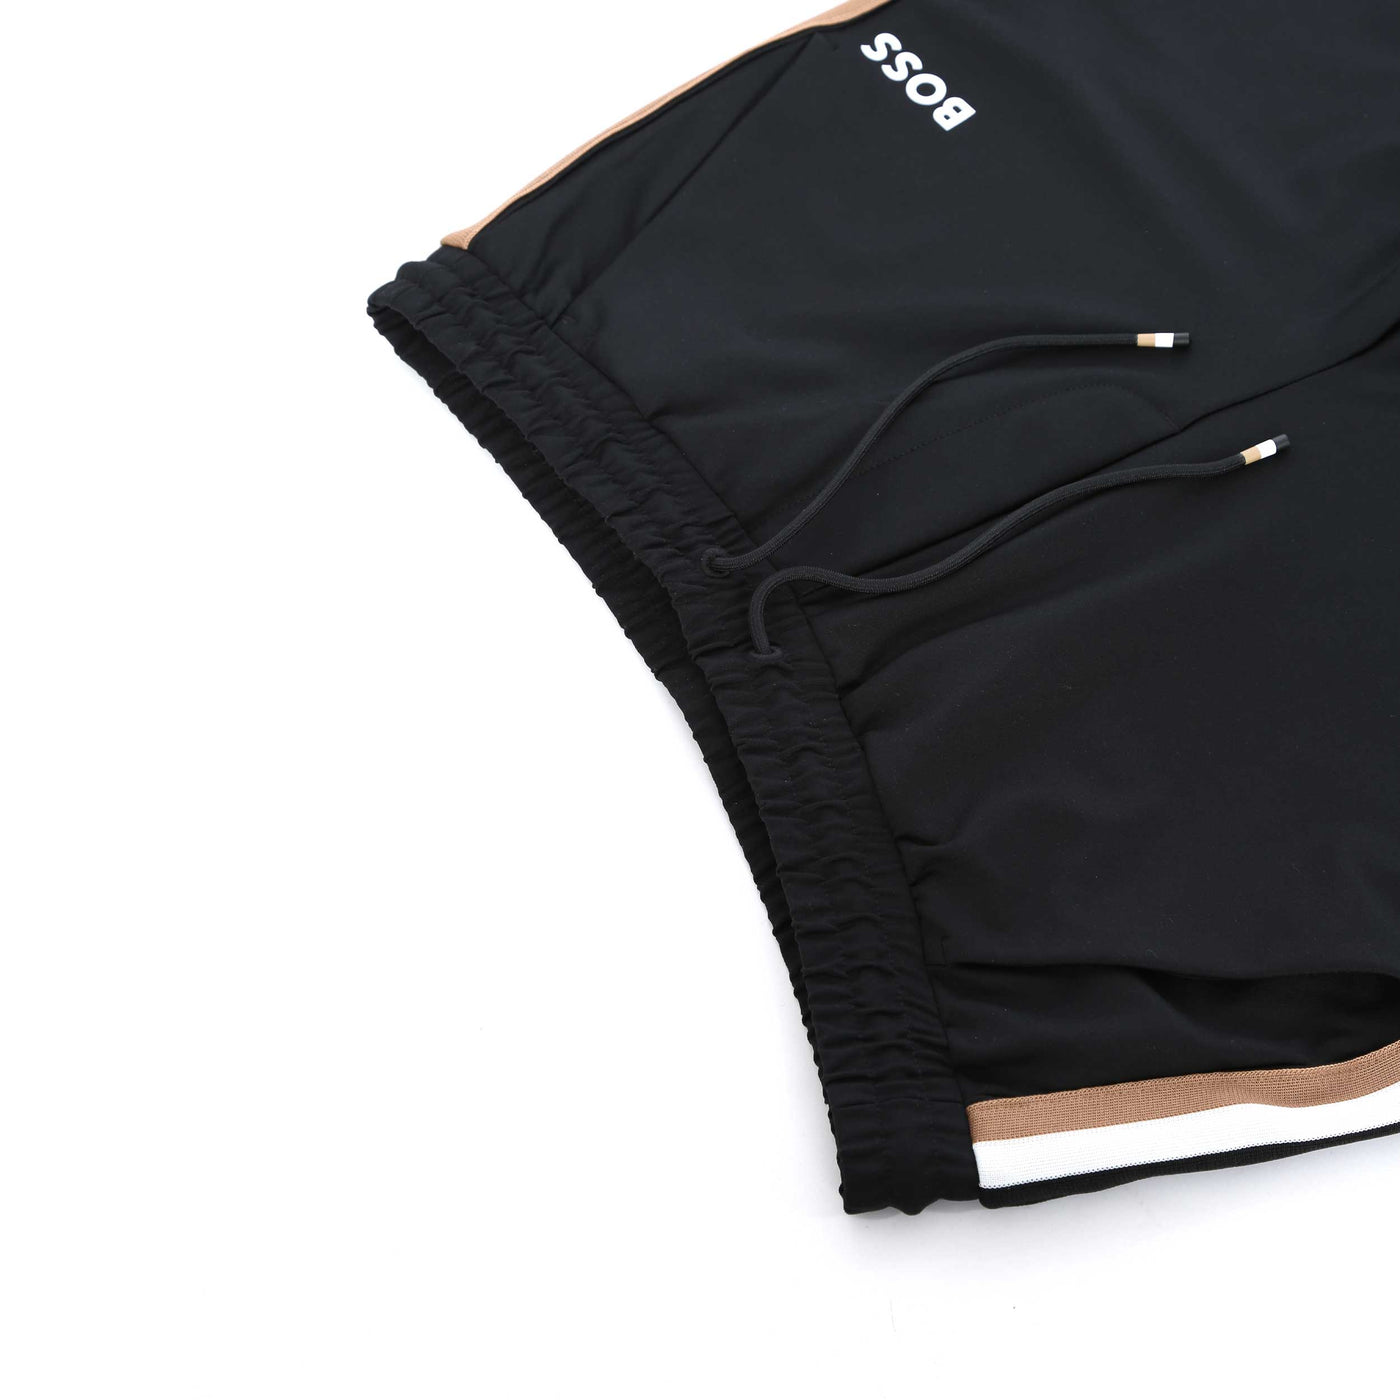 BOSS Hicon MB 1 Sweat Pant in Black Waist